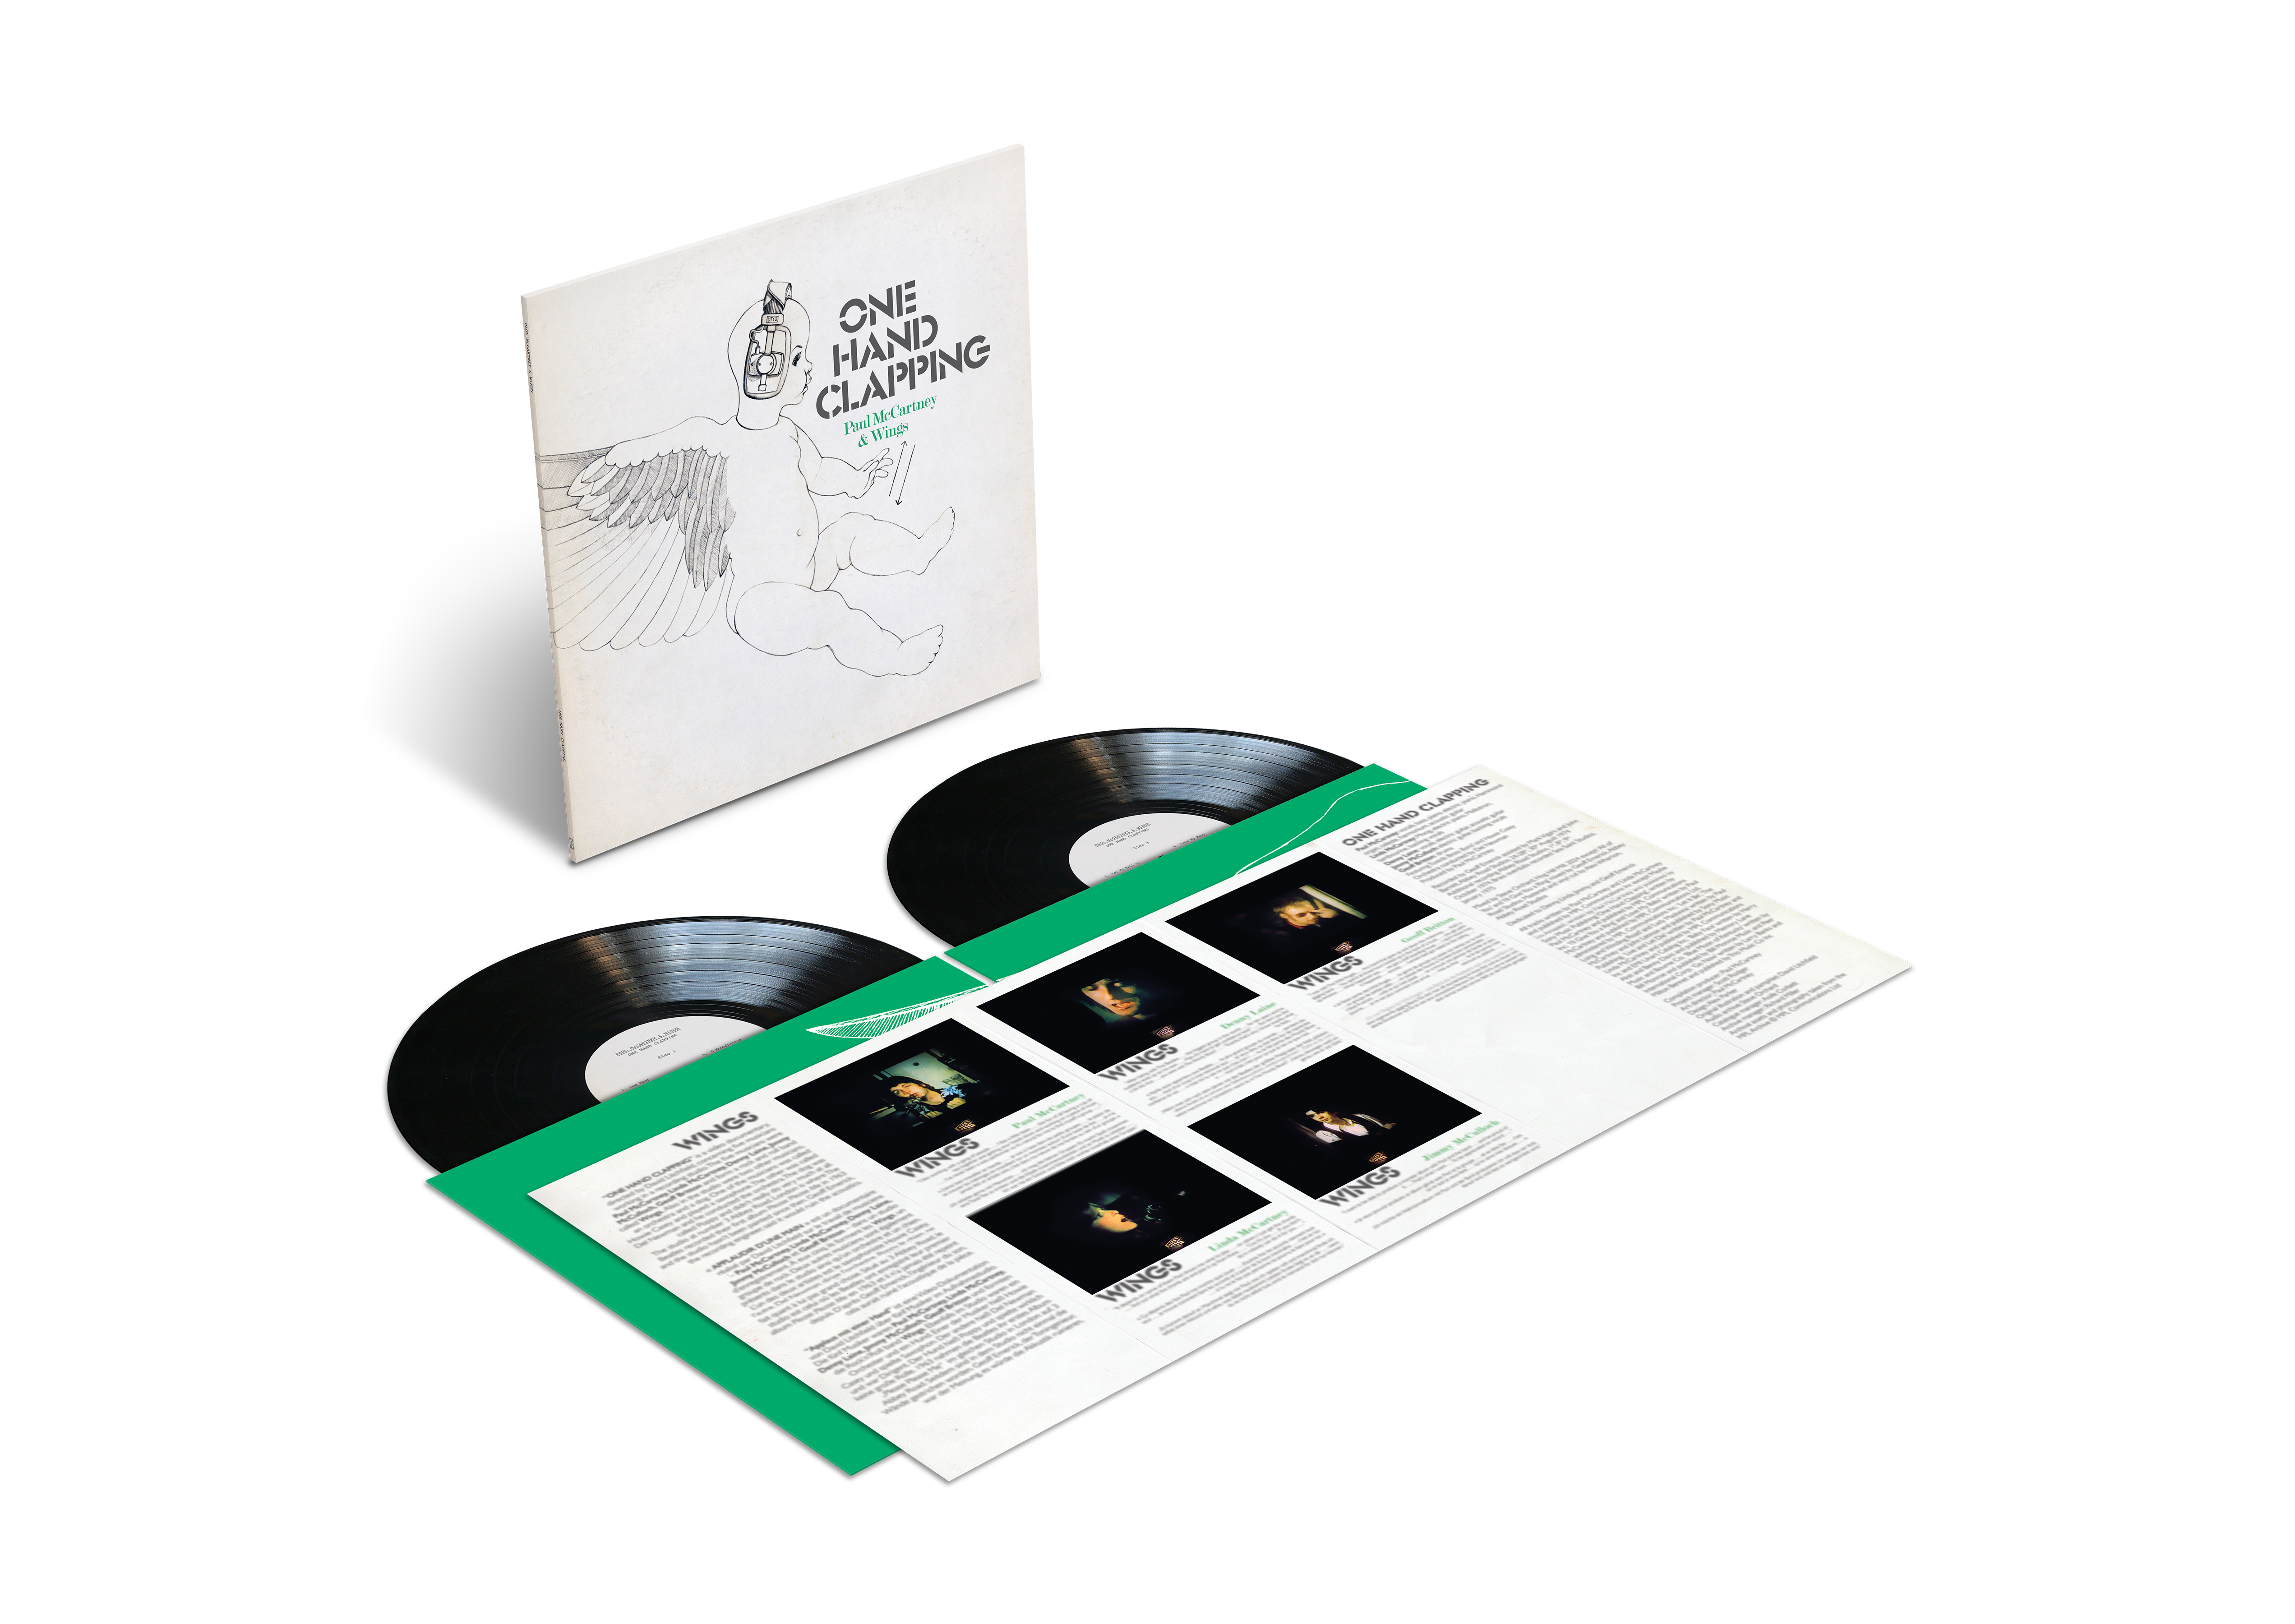 One Hand Clapping 2LP + T-Shirt